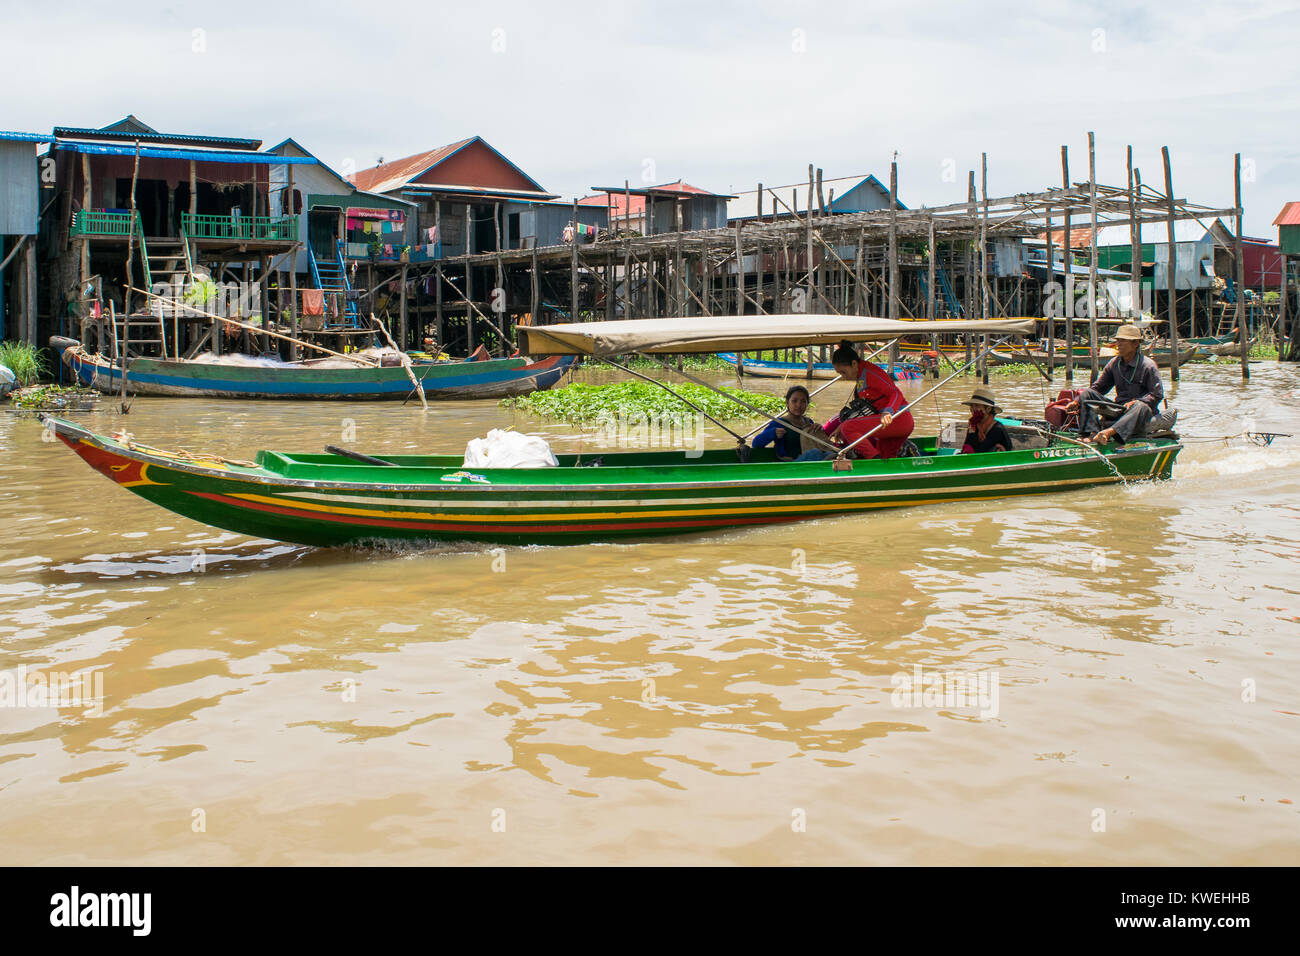 Three Cambodia Asian people on a small green long motor powered boat going through the floodplain of Tonle Sap Great Lake. Boat with tent for shade Stock Photo